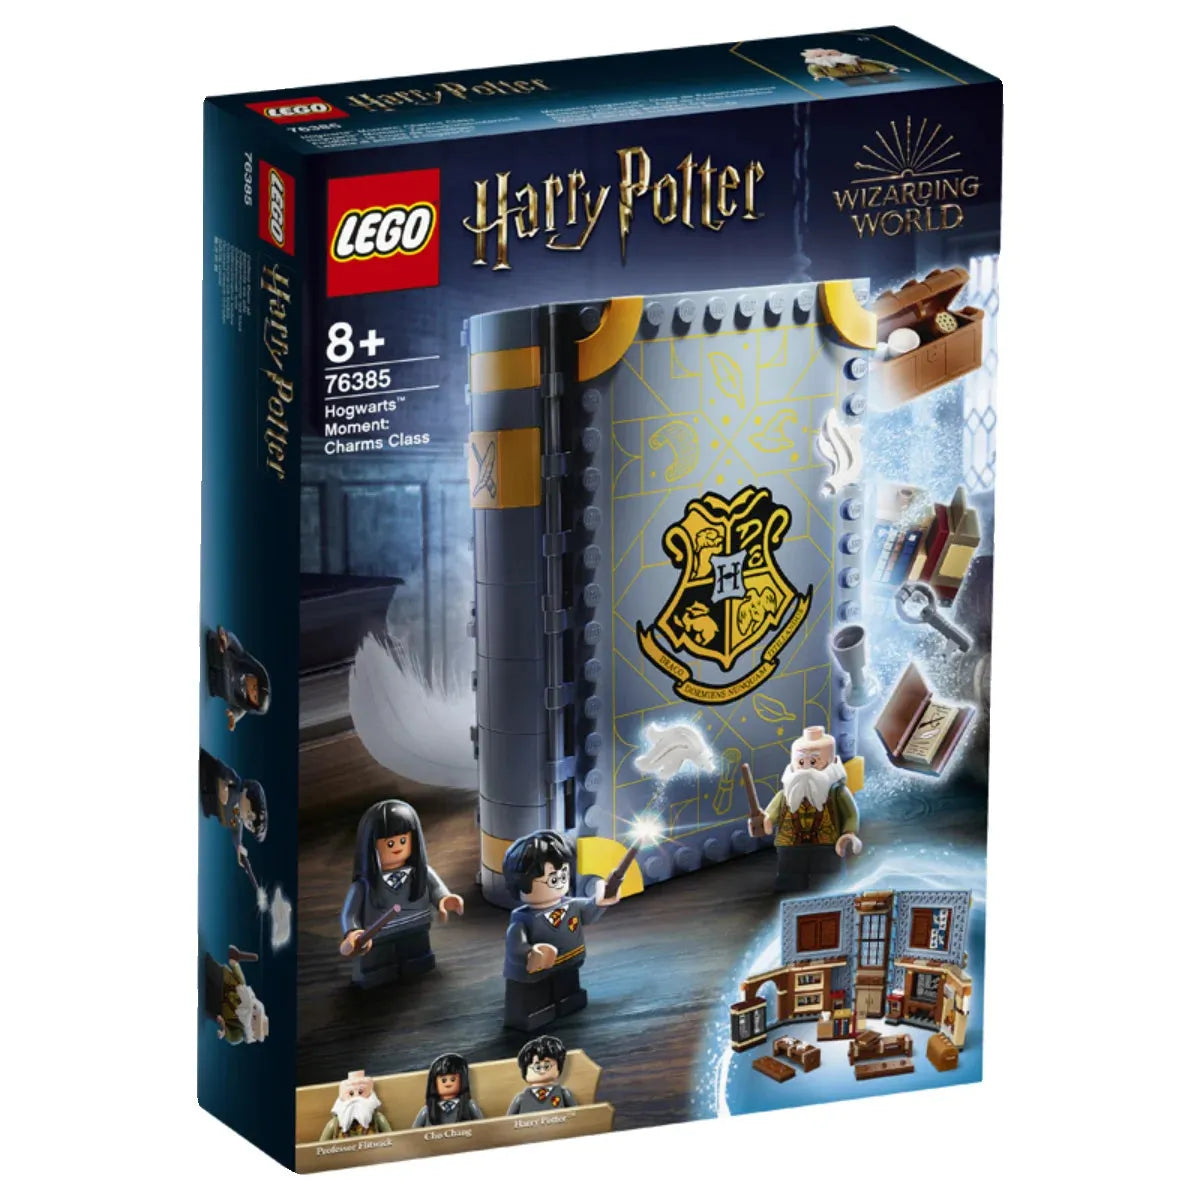 LEGO Harry Potter 76385 Hogwarts Moments: Curse Class Boys And Girls Puzzle Building Blocks